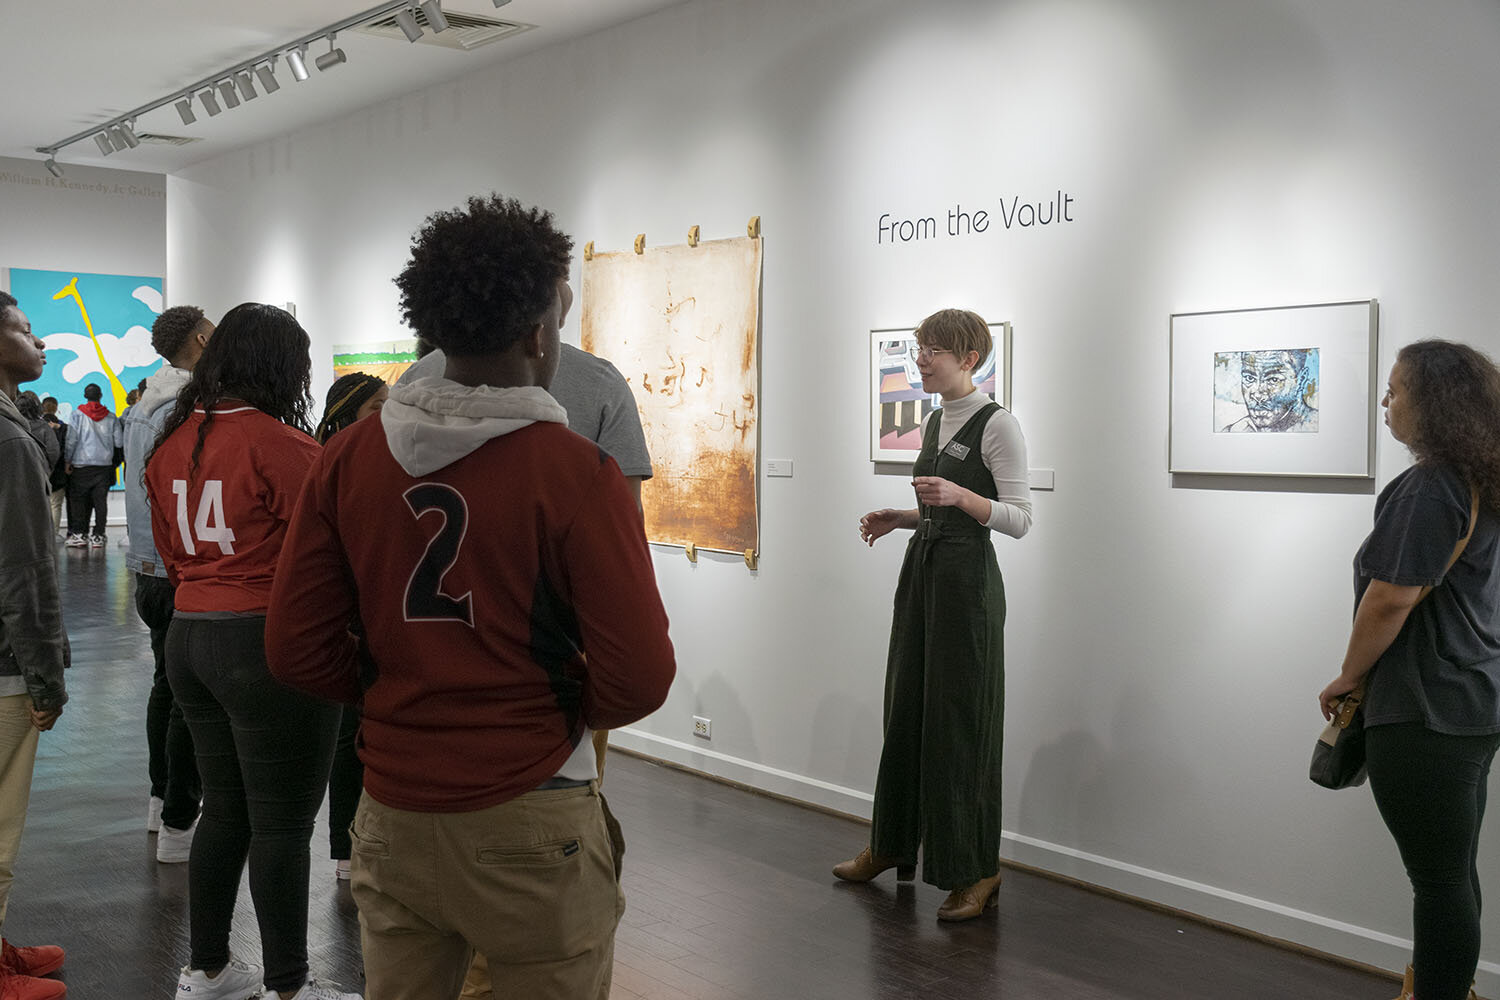  Curator Chaney Jewell leads a Dollarway High School tour group through the exhibition   From the Vault: Works from the Permanent Collection   in the Ben J. Altheimer Gallery, in March 2020. The exhibition was sponsored by the Kline Family Foundation